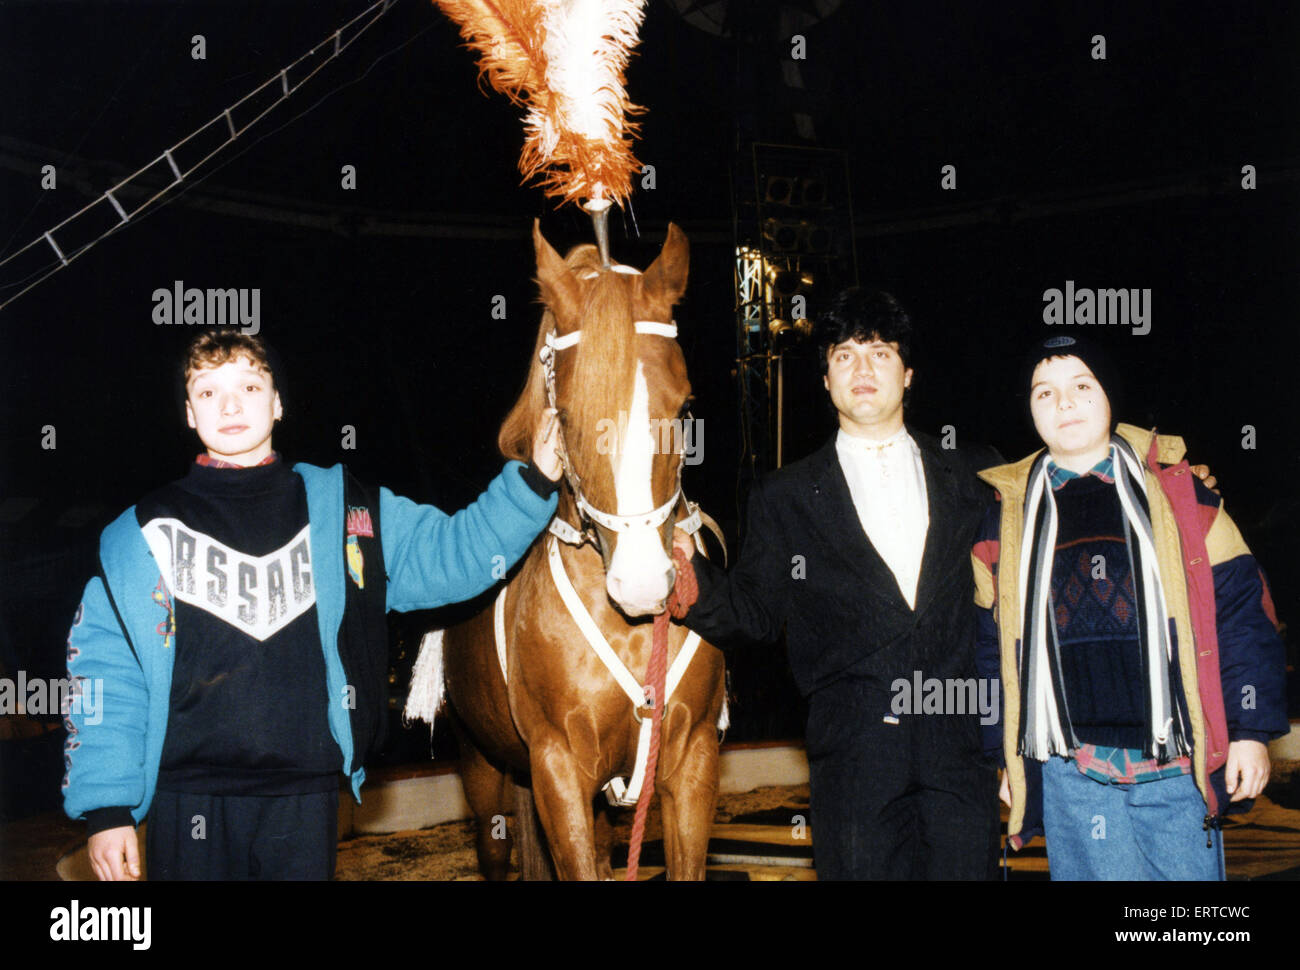 Two Romanian boys on an exchange visit to Middlesbrough schools. The two boys Daniel Iliescu and Alexandru Selim are pictured on a visit to the circus where they met fellow countryman Ionuts Ronescu who looks after the horses including Maril, in the picture. 5th January 1995. Stock Photo